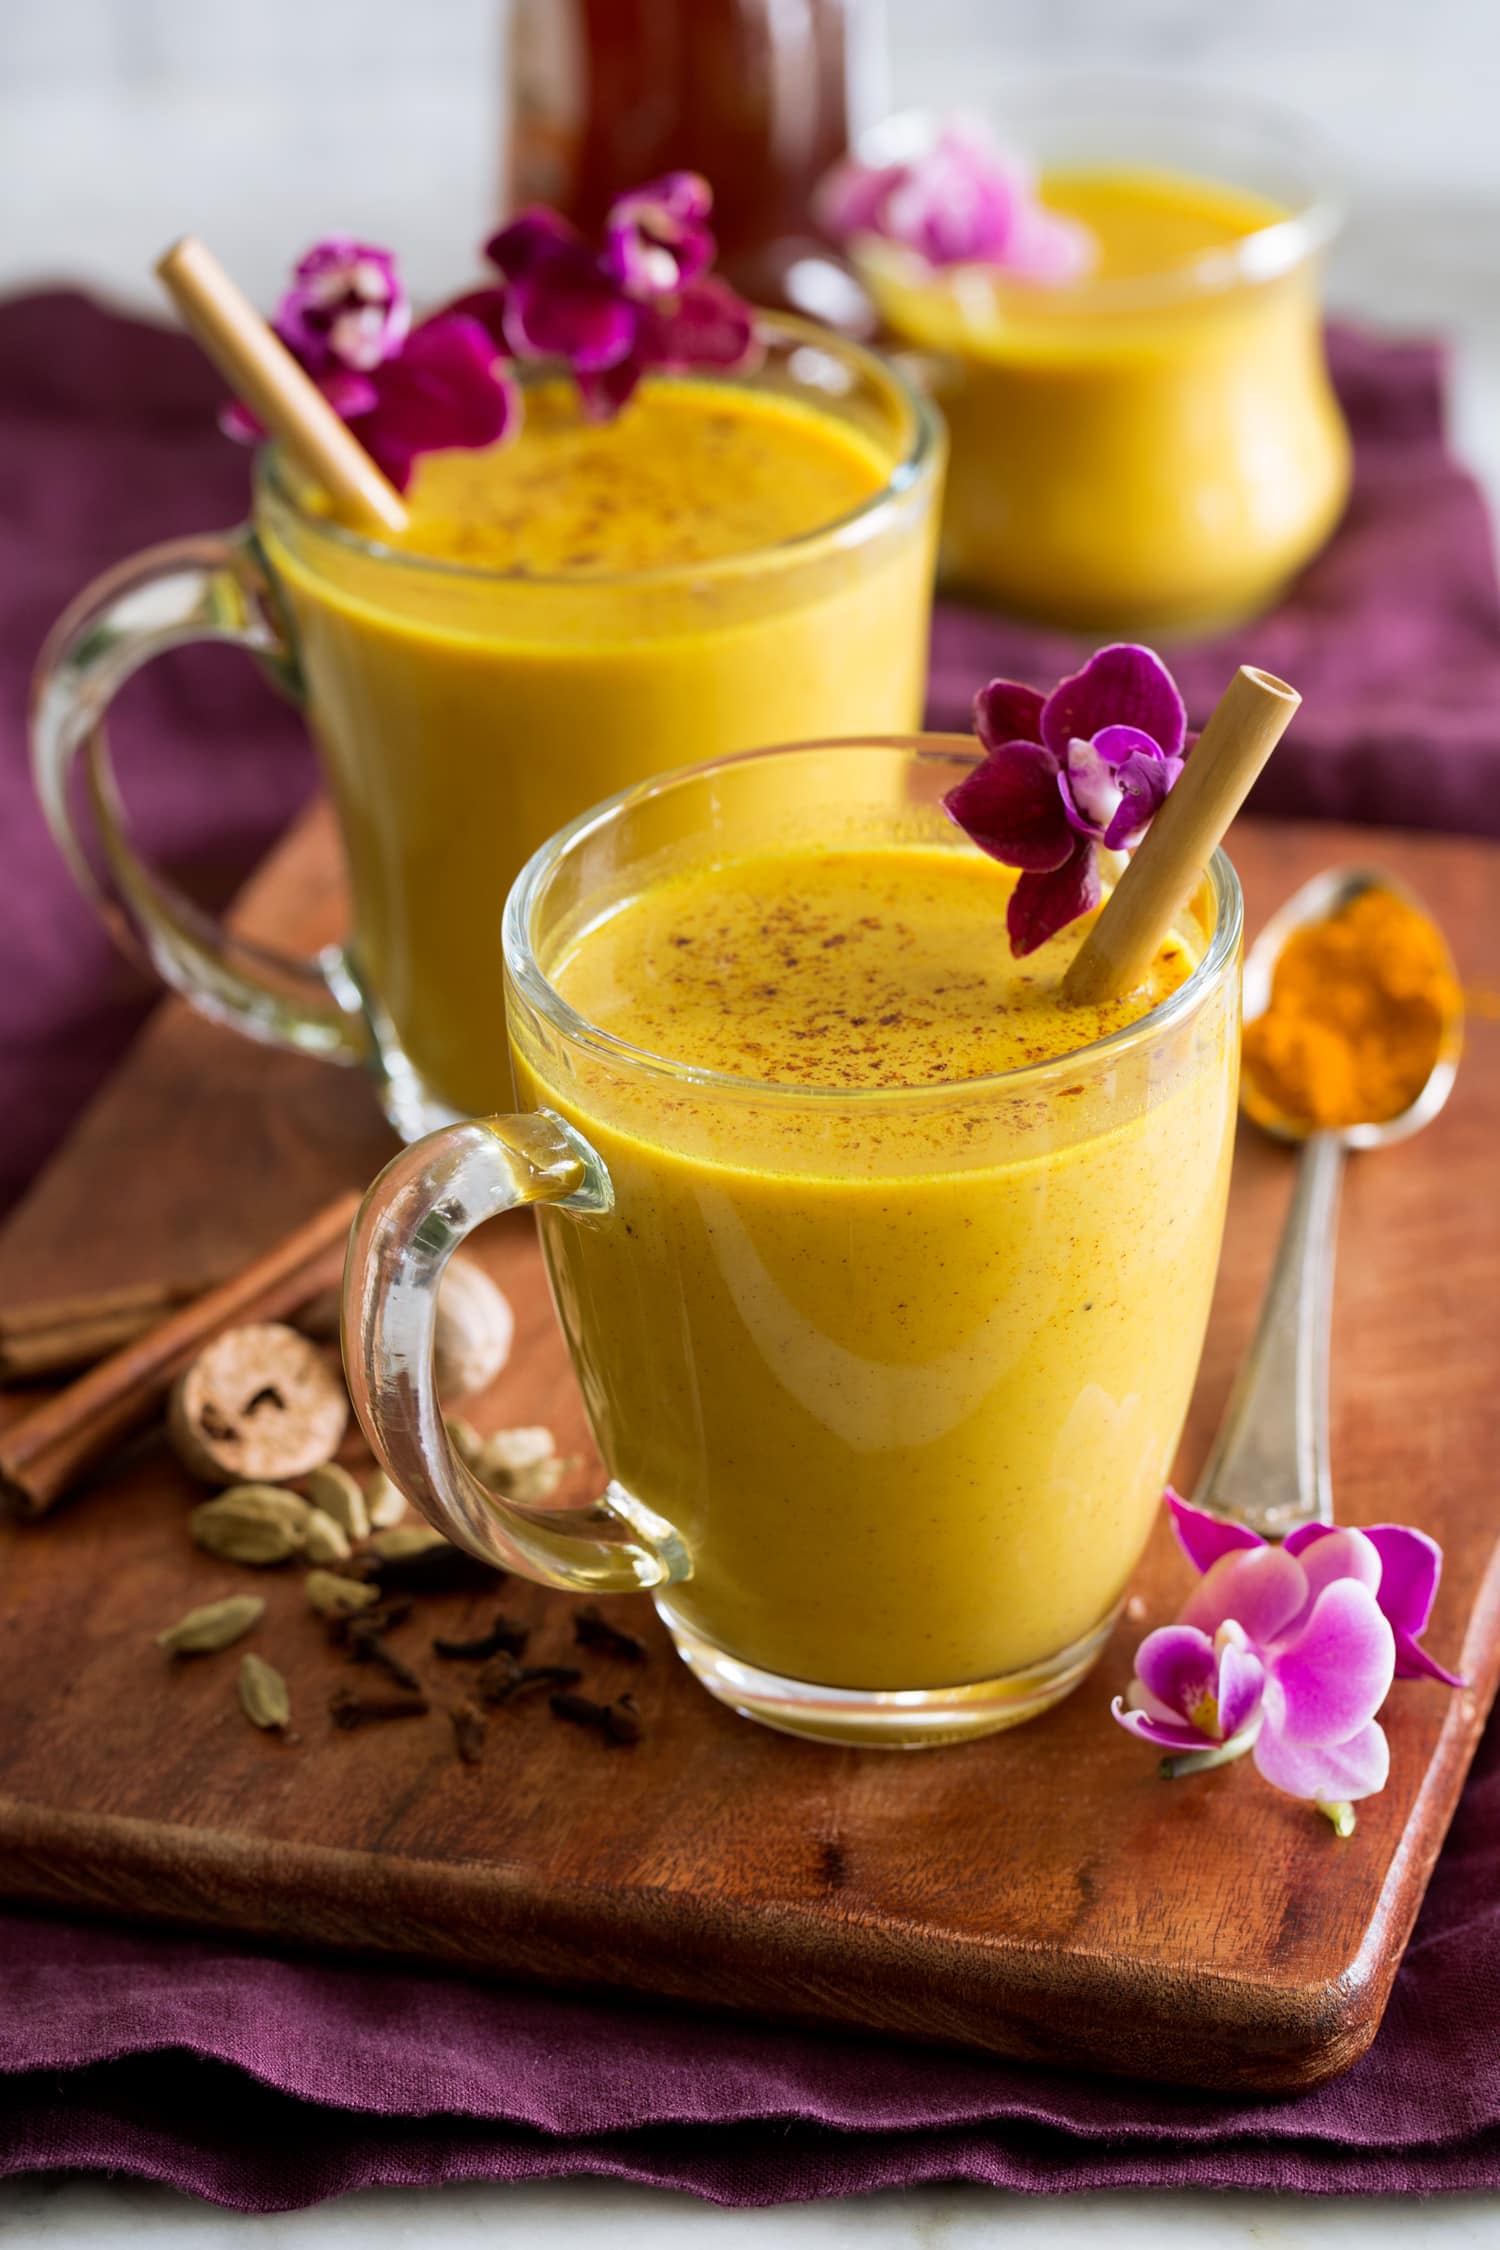 Golden milk shown in glass mugs on a wooden tray with spices and flowers to the side.